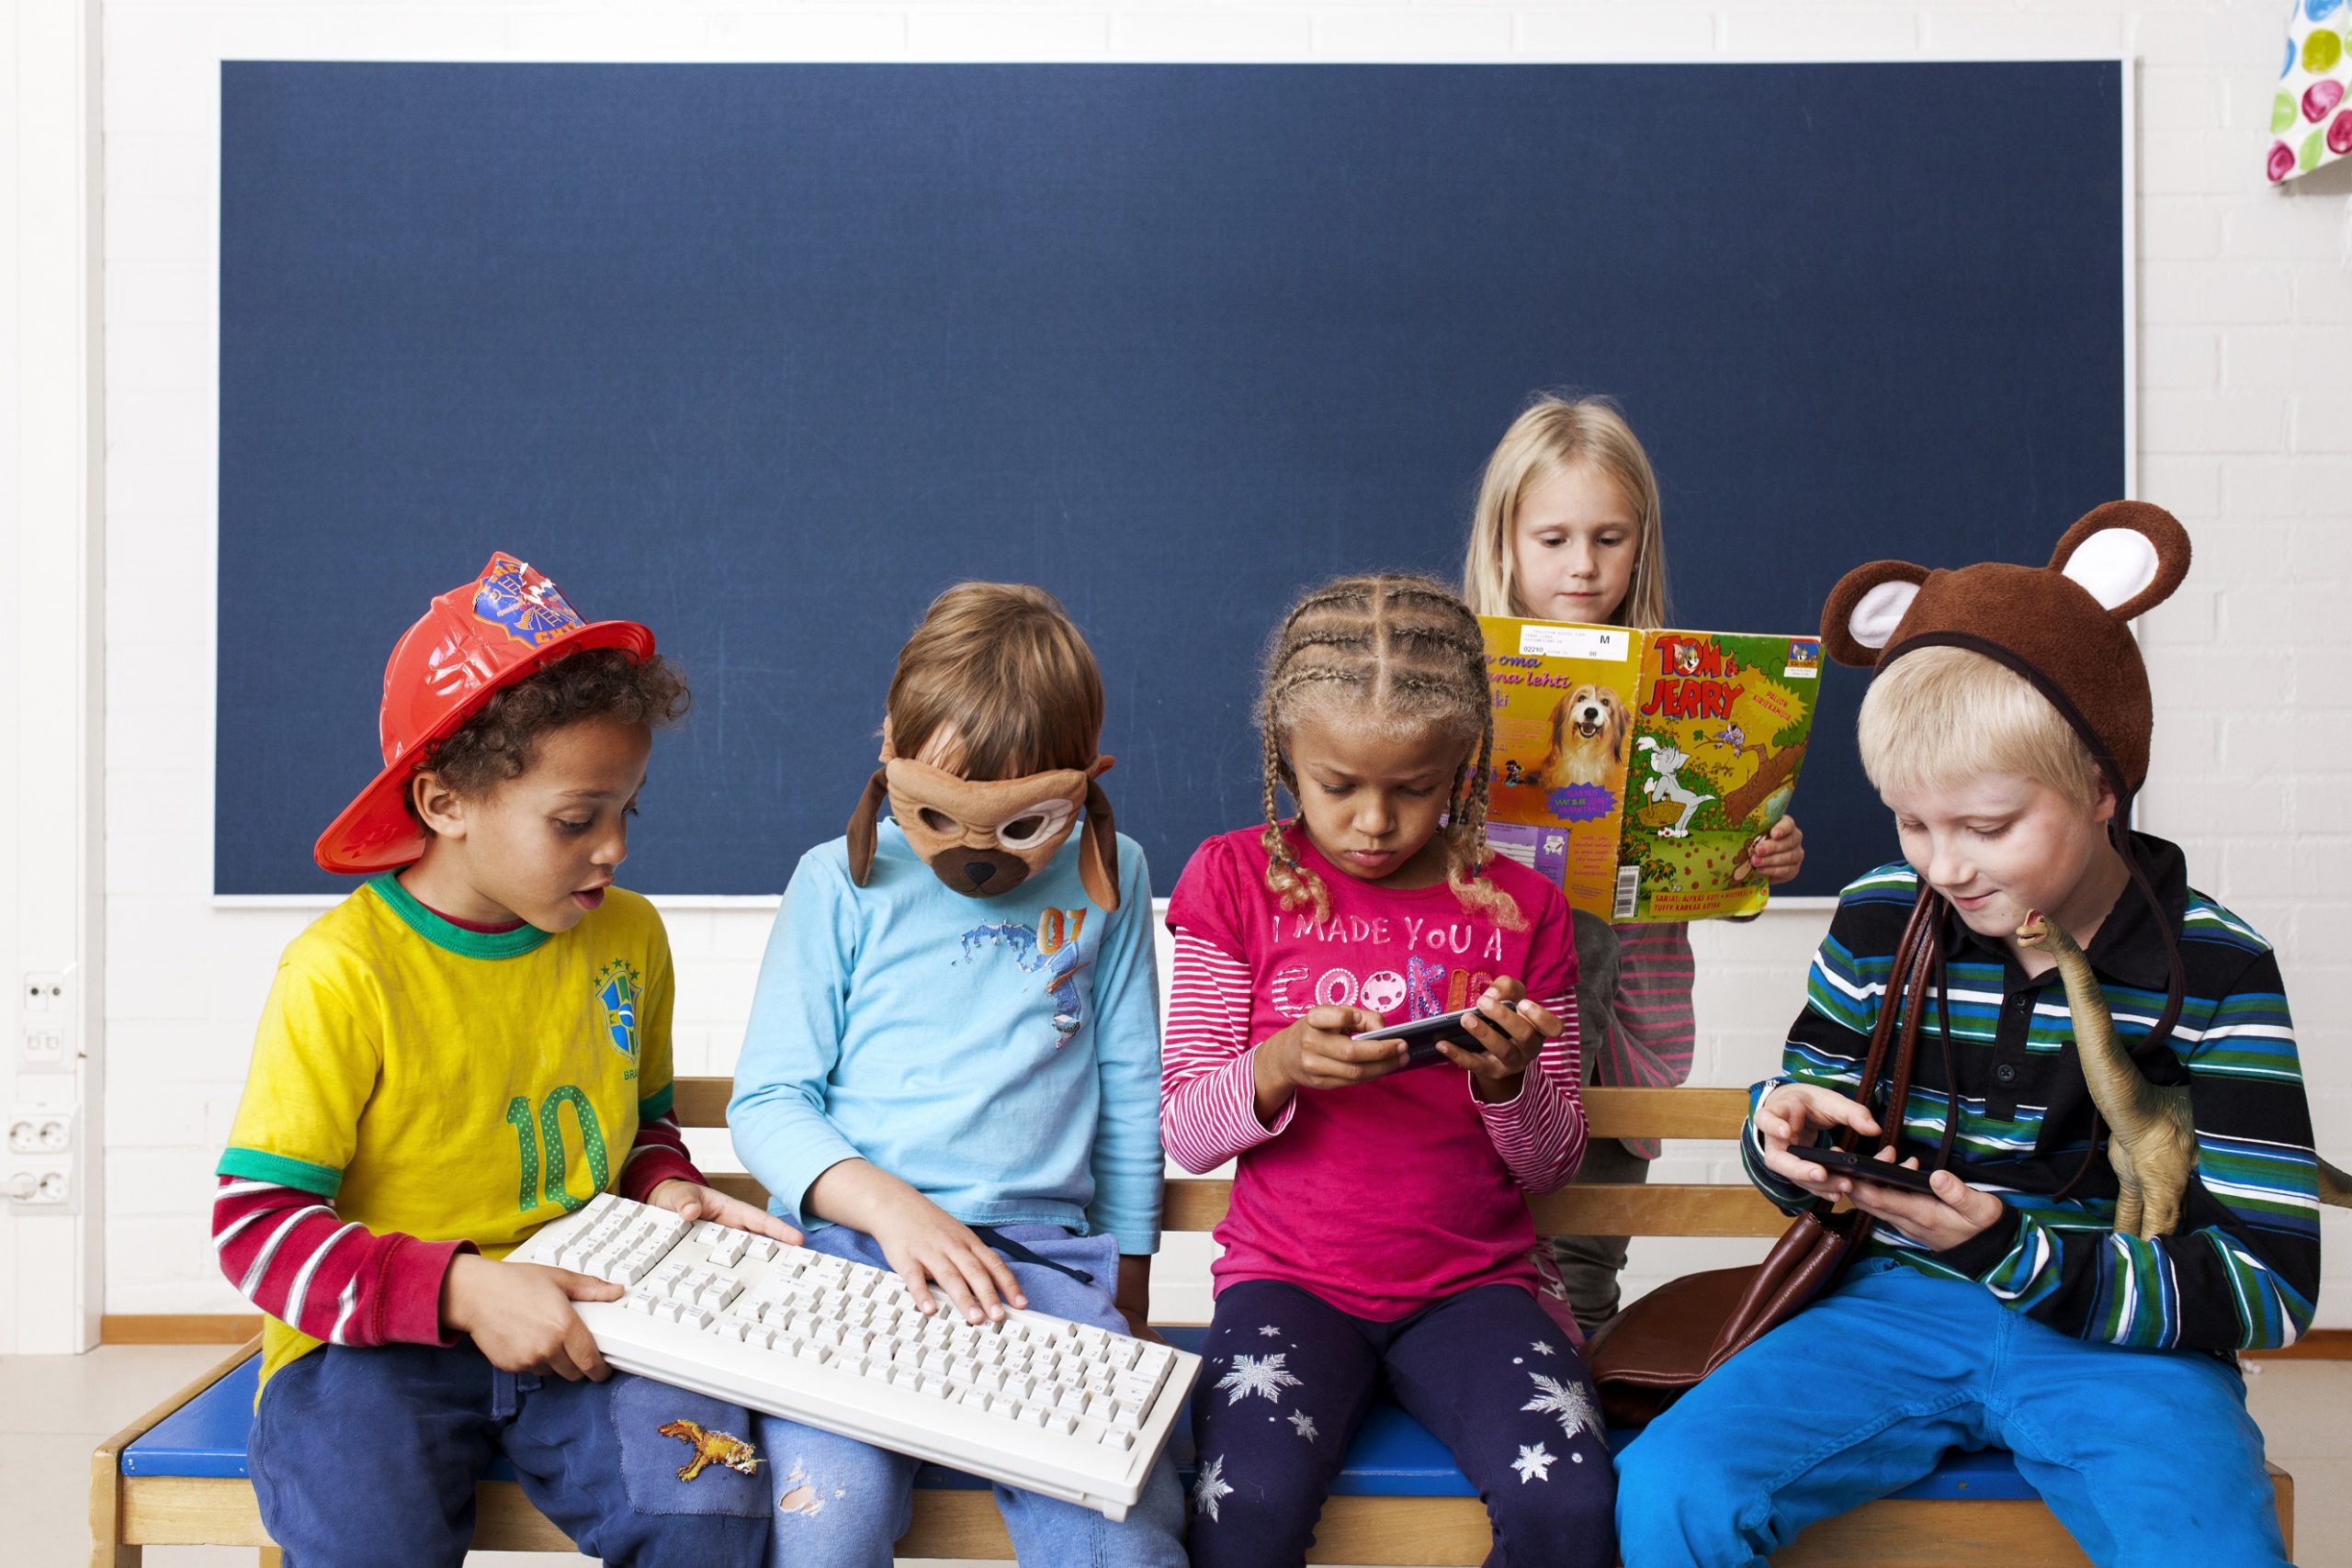 Towards equal opportunities for media literacy in Finland